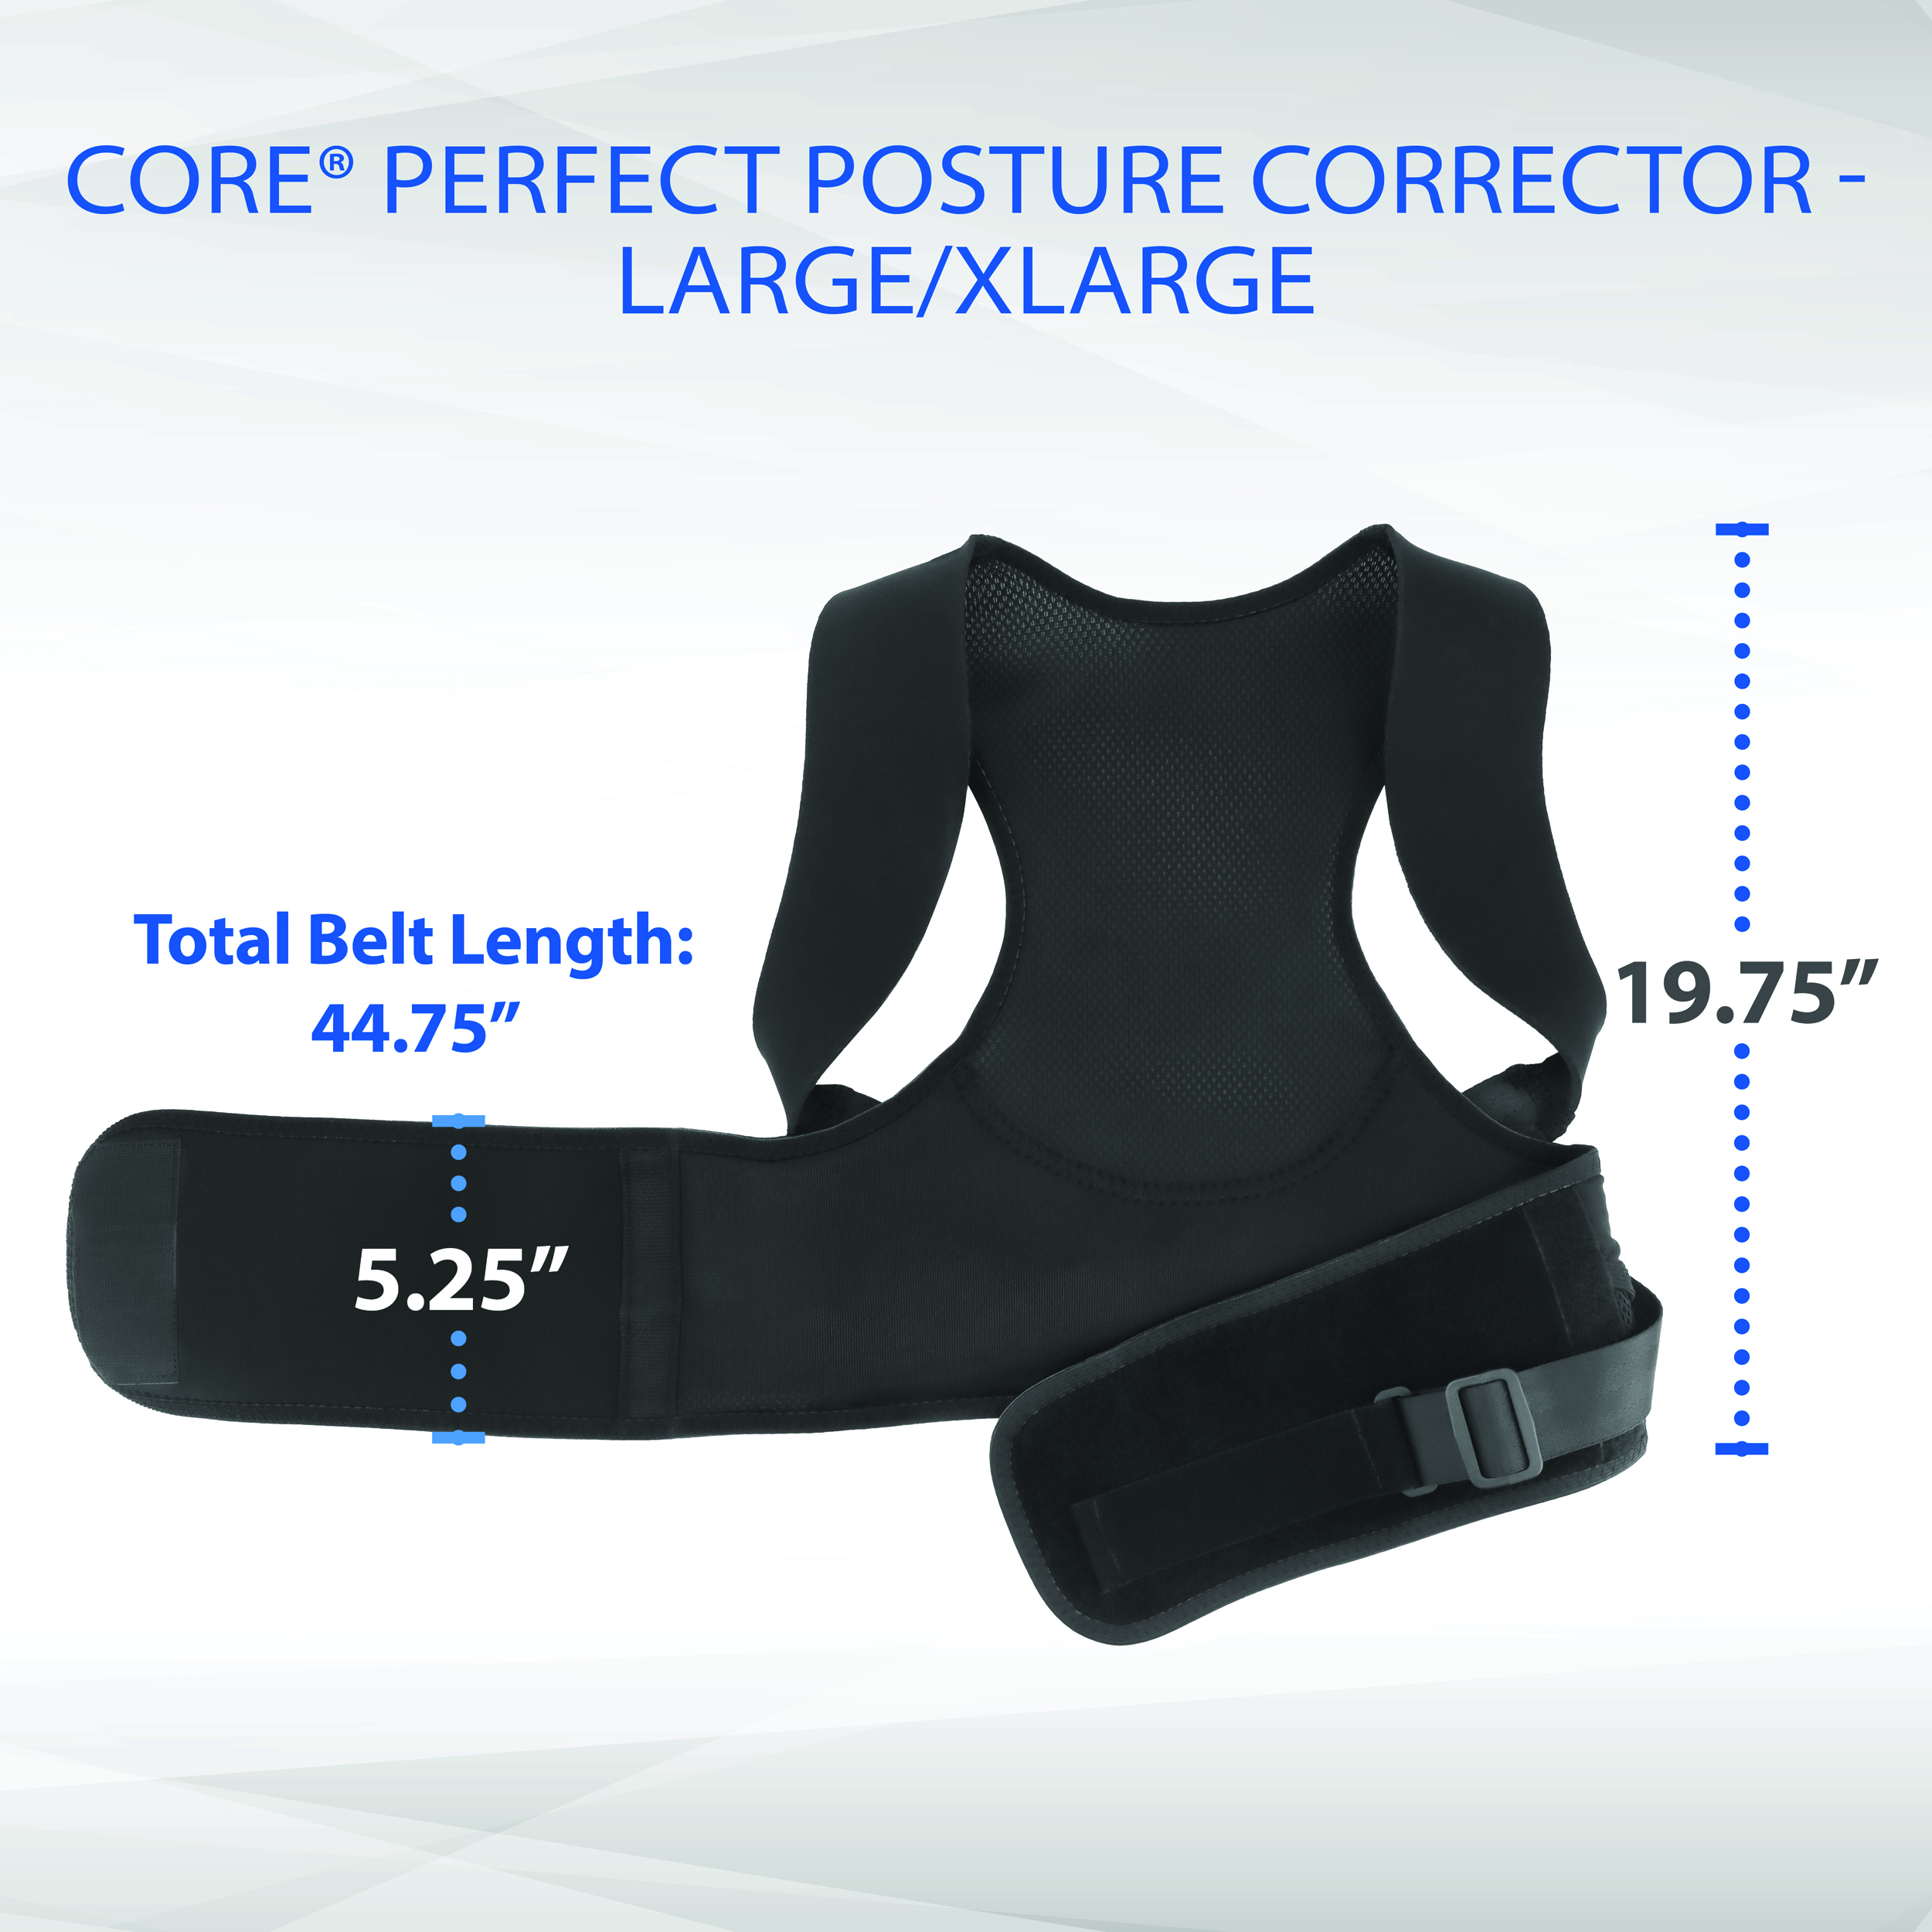 Core Perfect Posture Corrector  Helps Relieve Back & Shoulder Pain